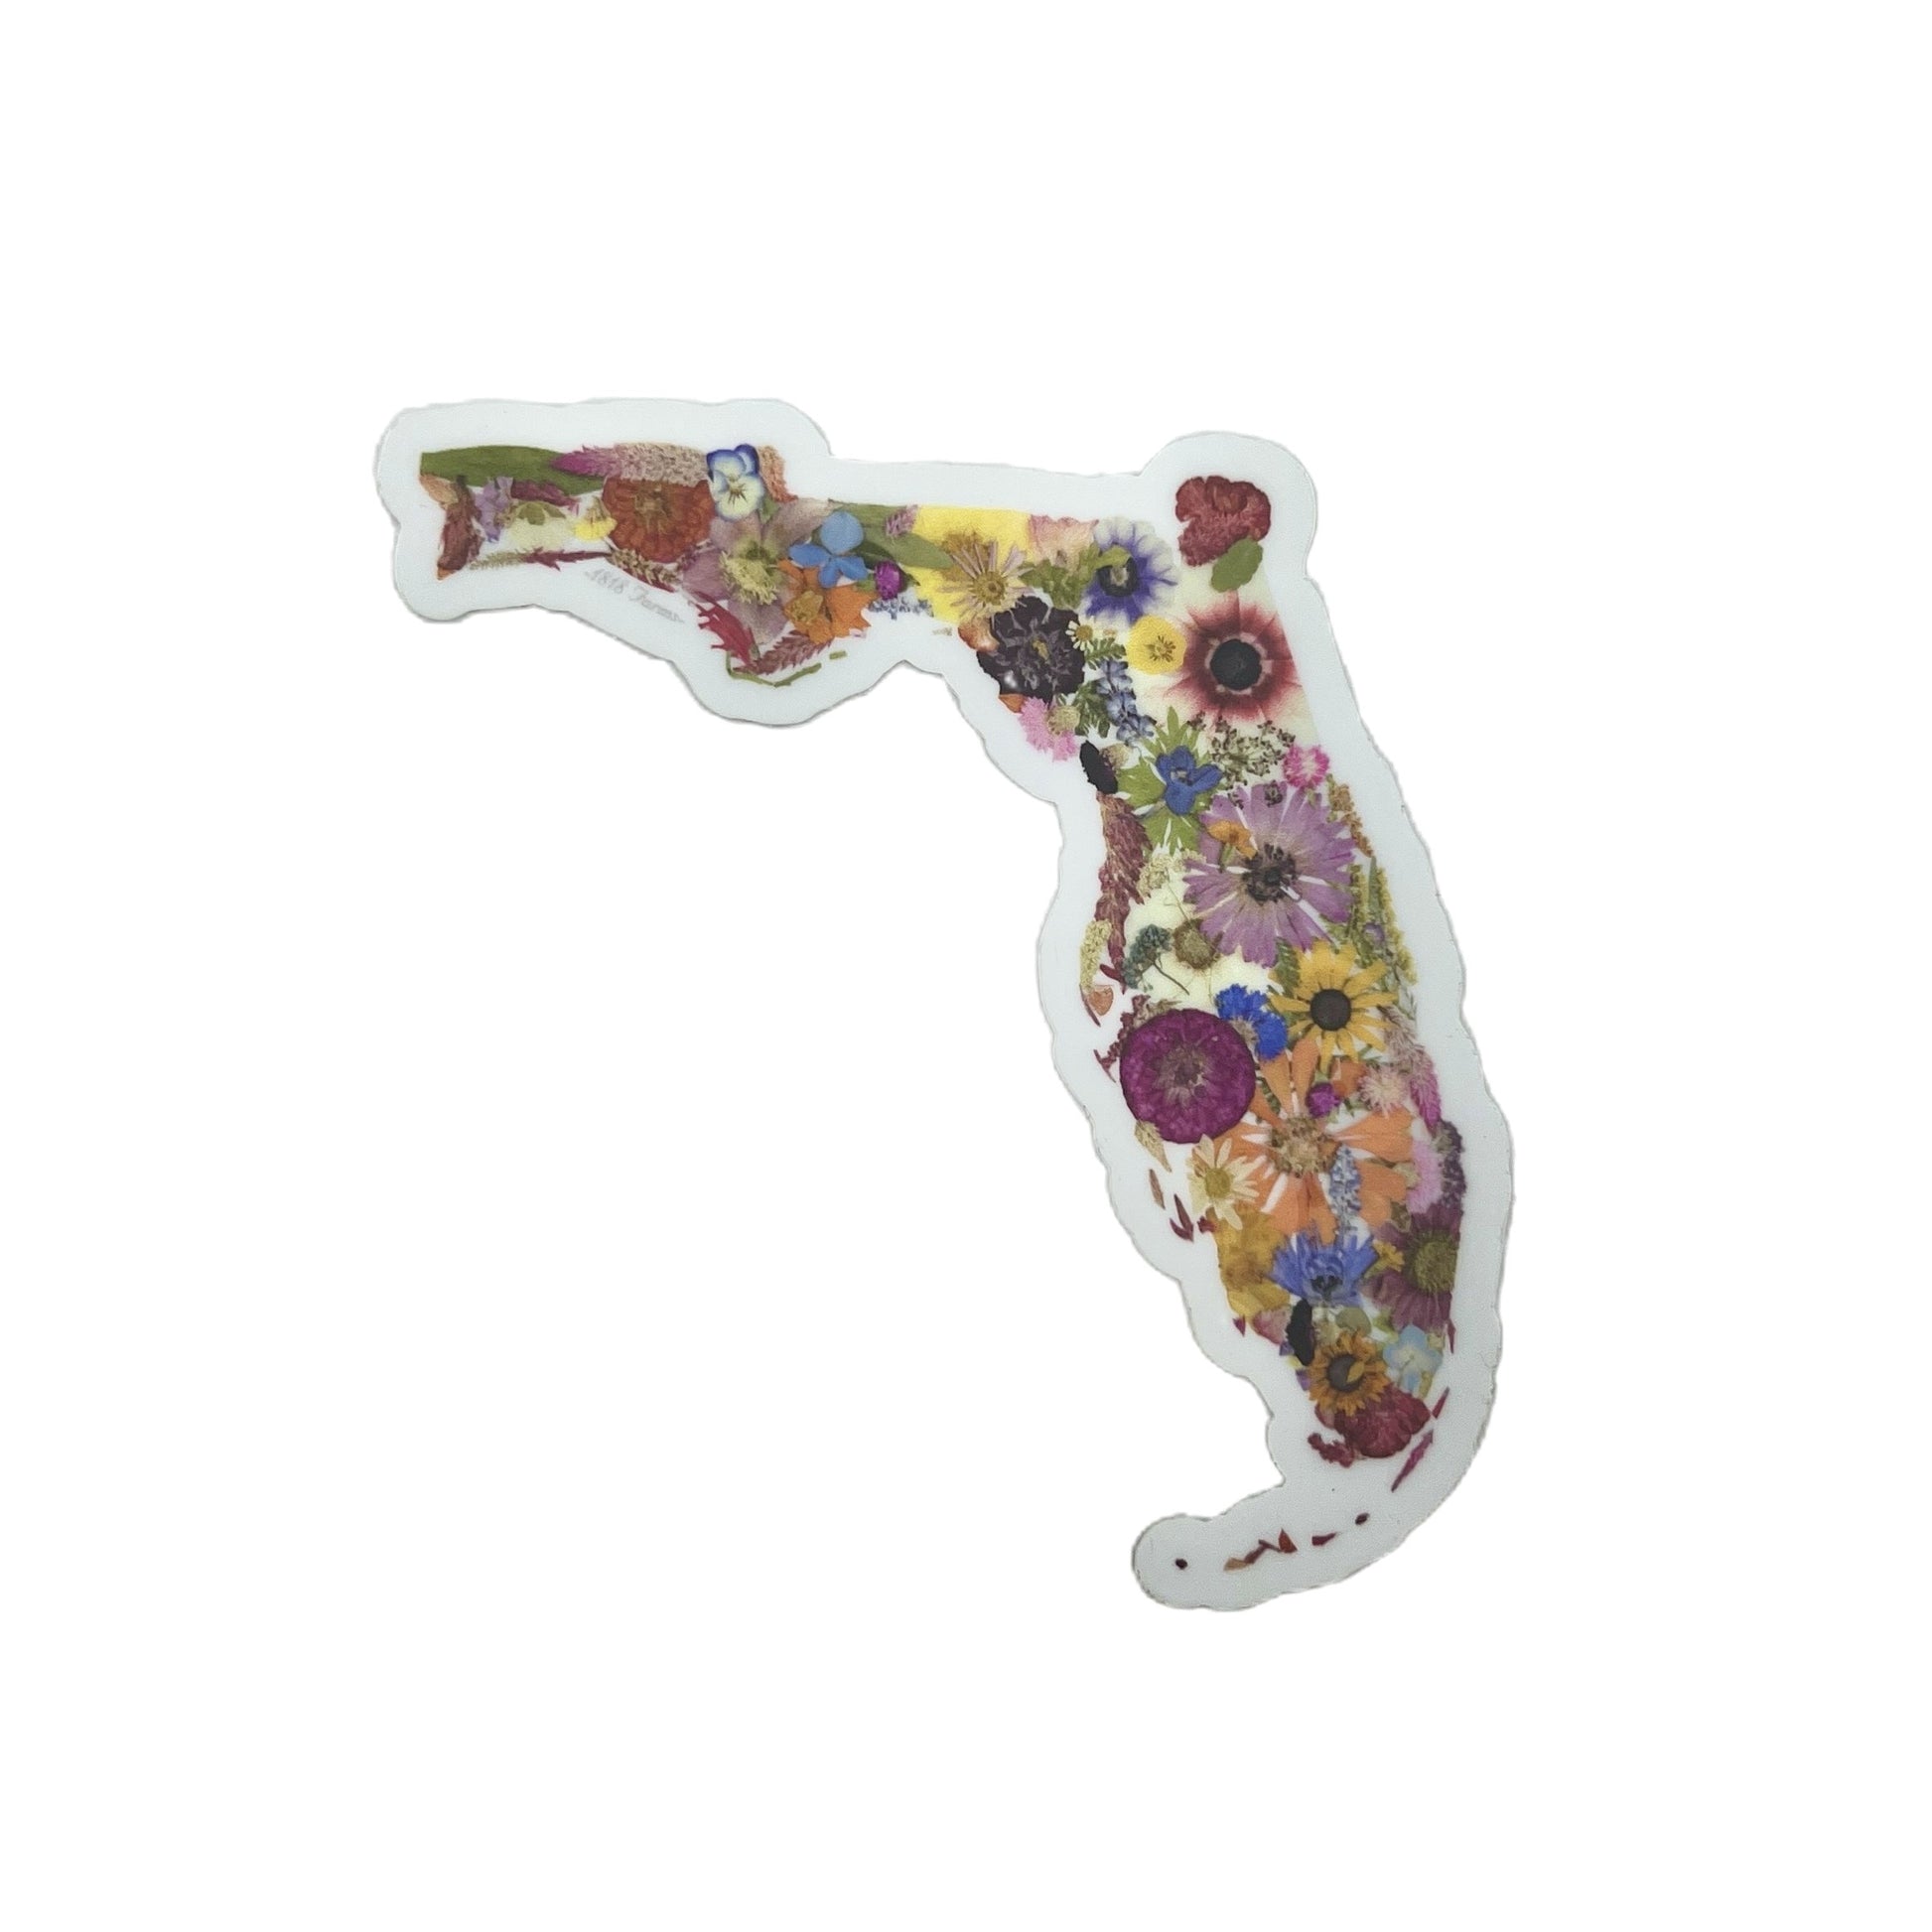 Florida Themed Vinyl Sticker Featuring Dried, Pressed Flowers - "Where I Bloom" Collection Vinyl Sticker 1818 Farms   